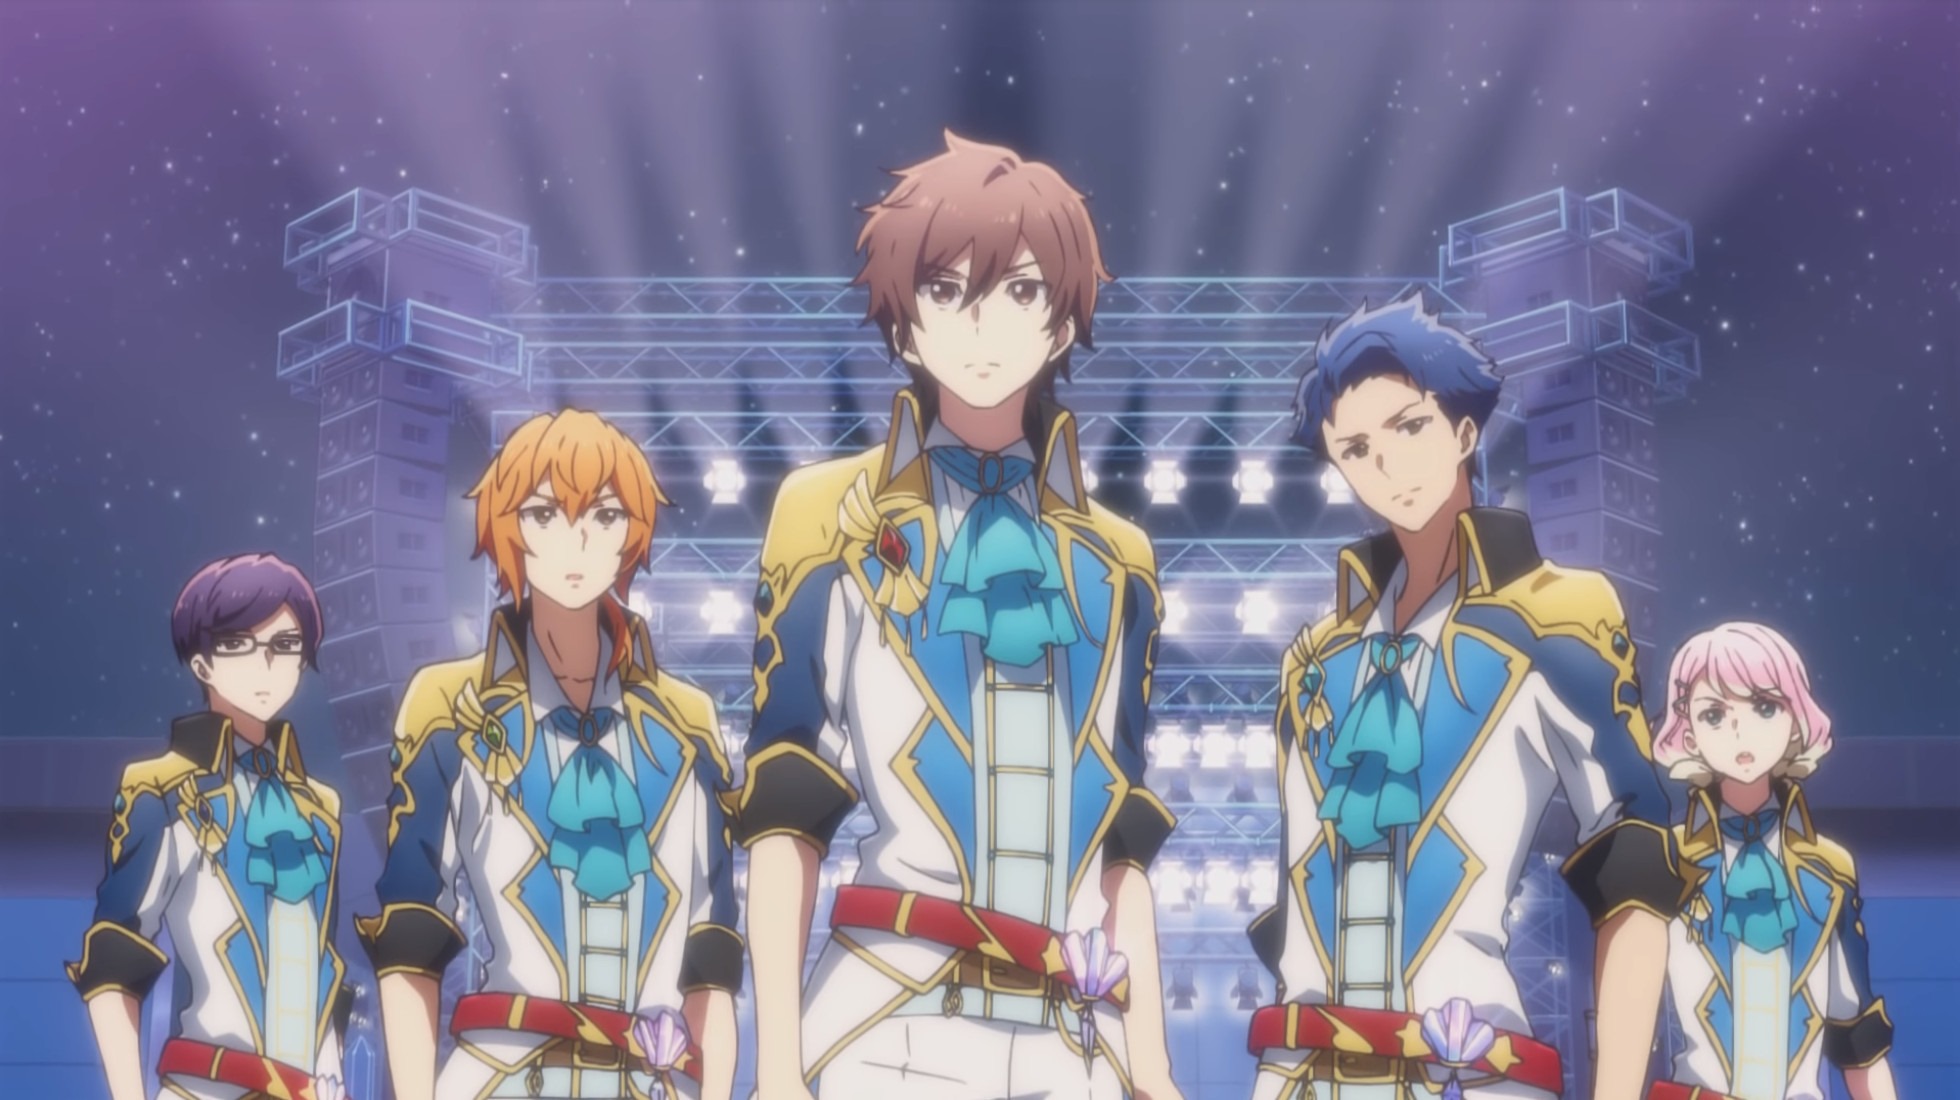 Get in Tune with the Adventures of These Anime Idol Boys